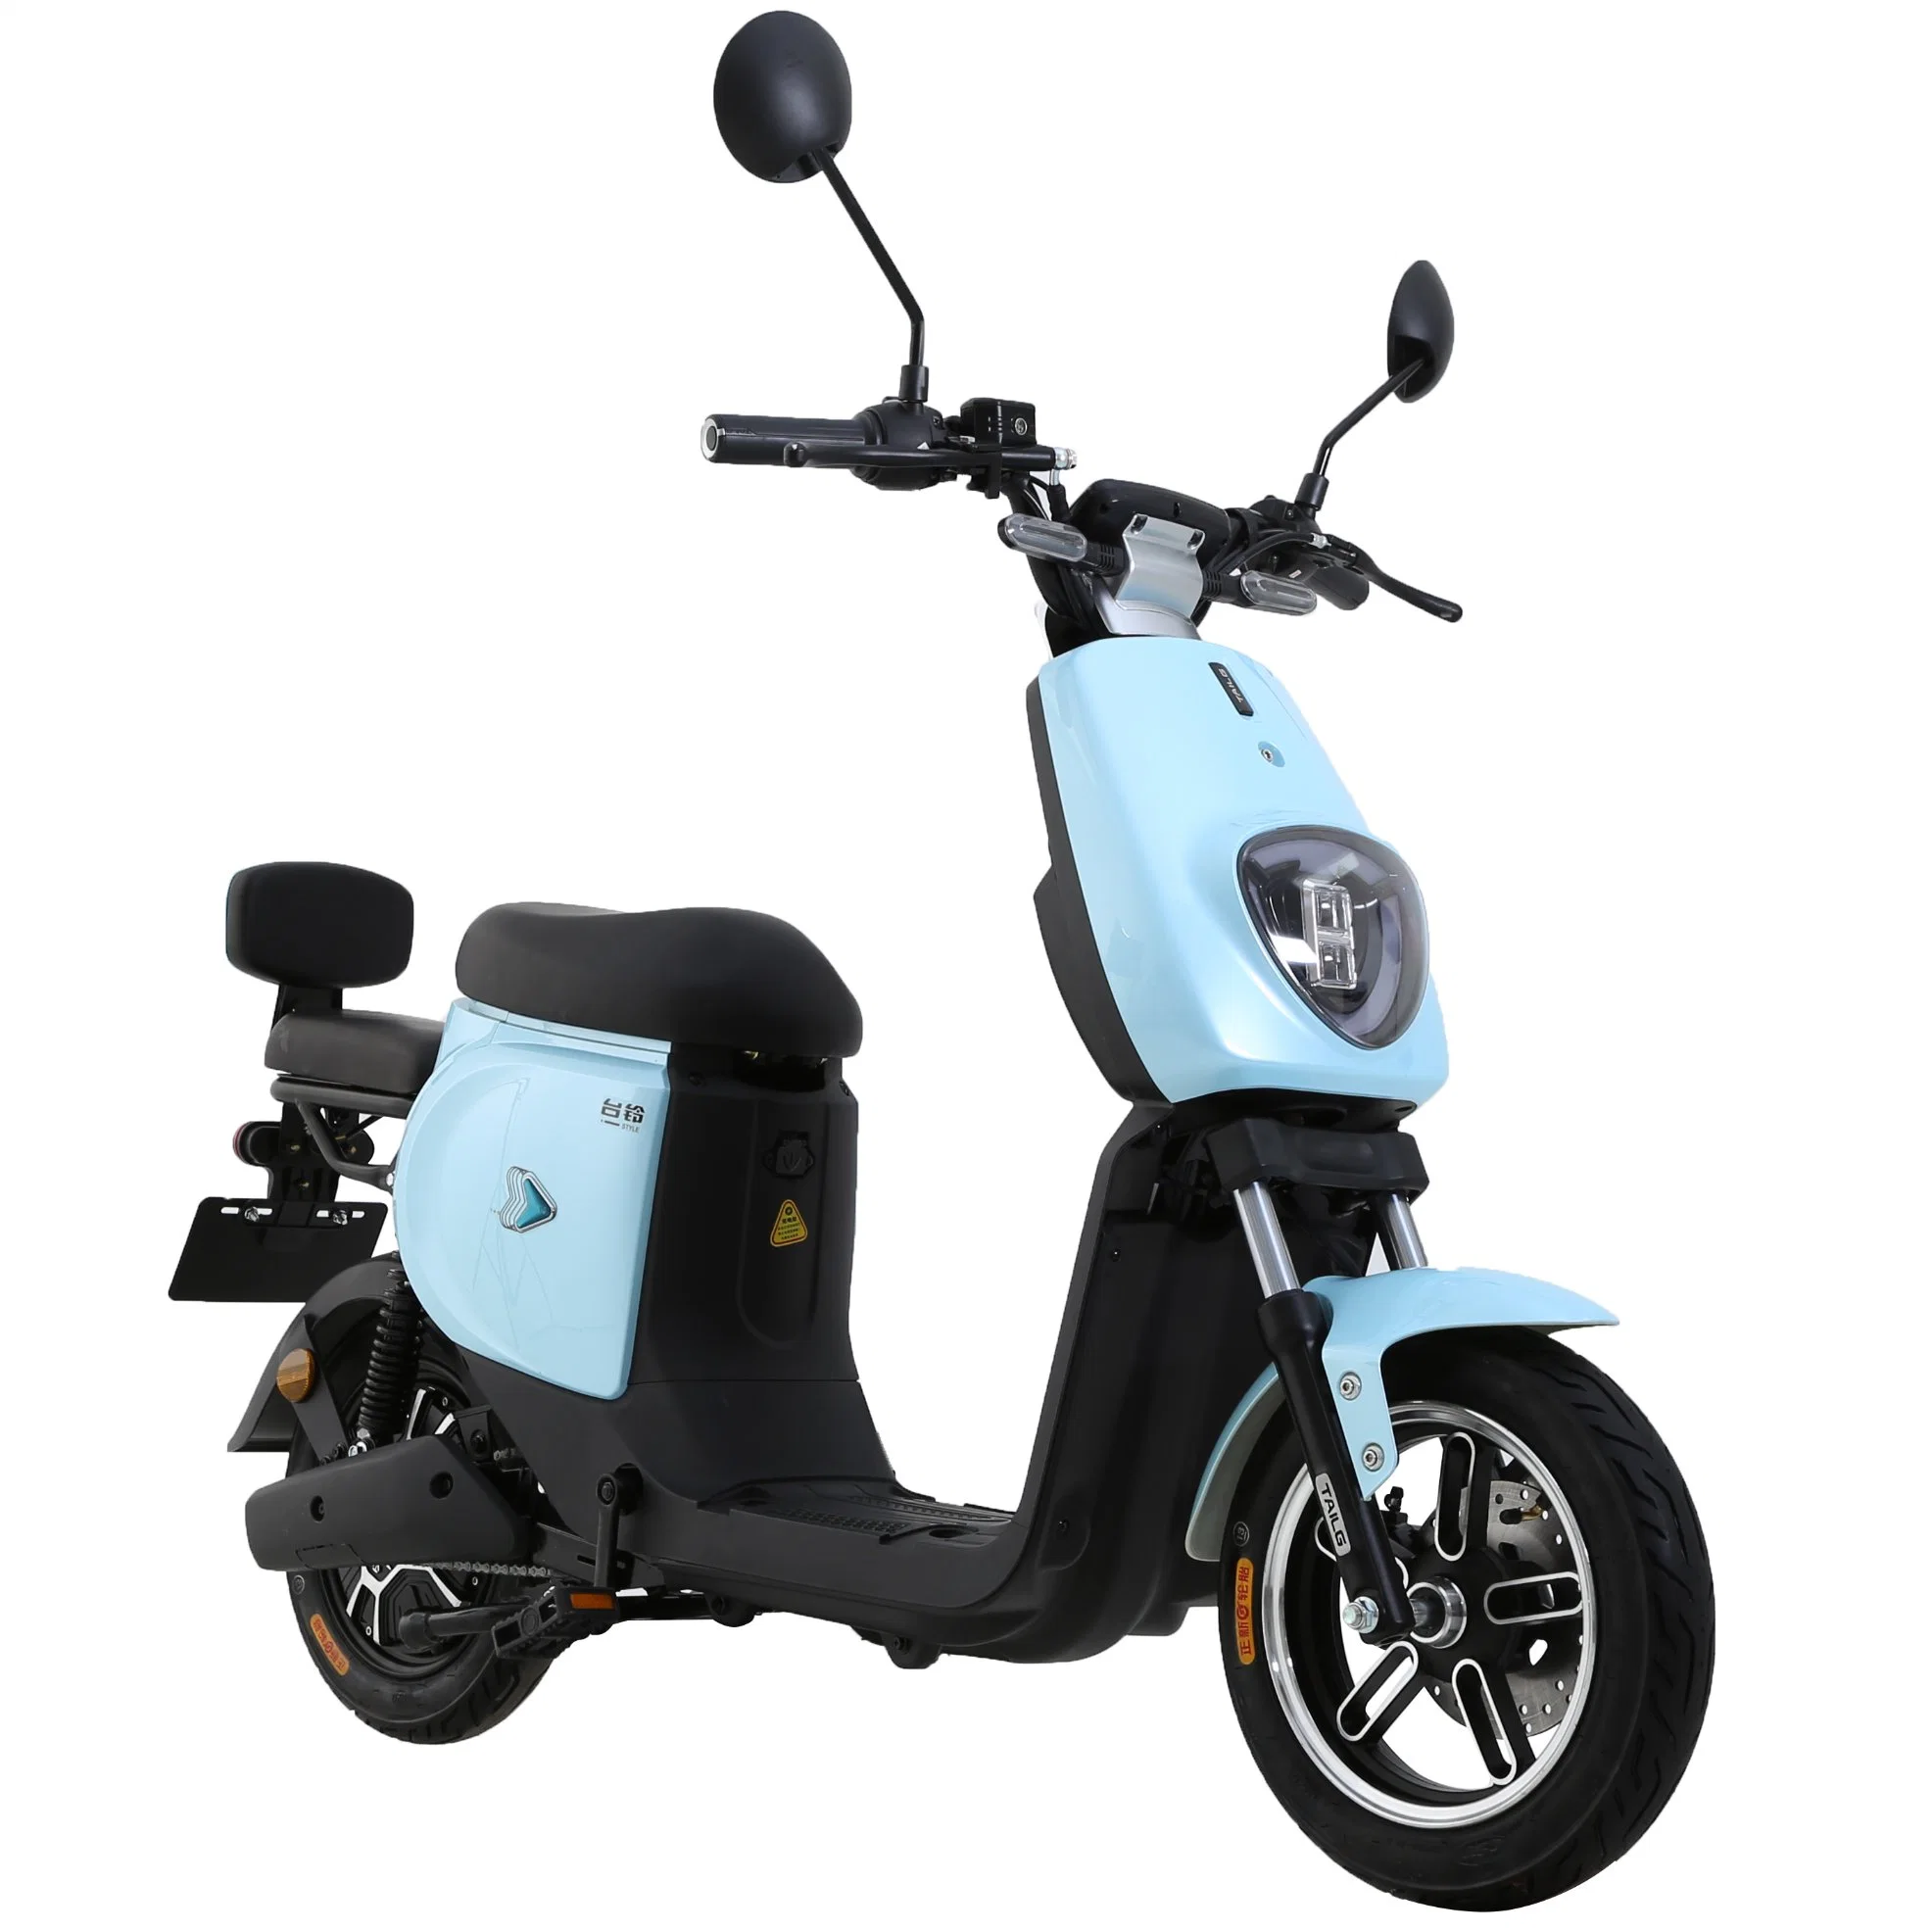 48V500W Electric Moped Scooter with Removable Lithium Battery